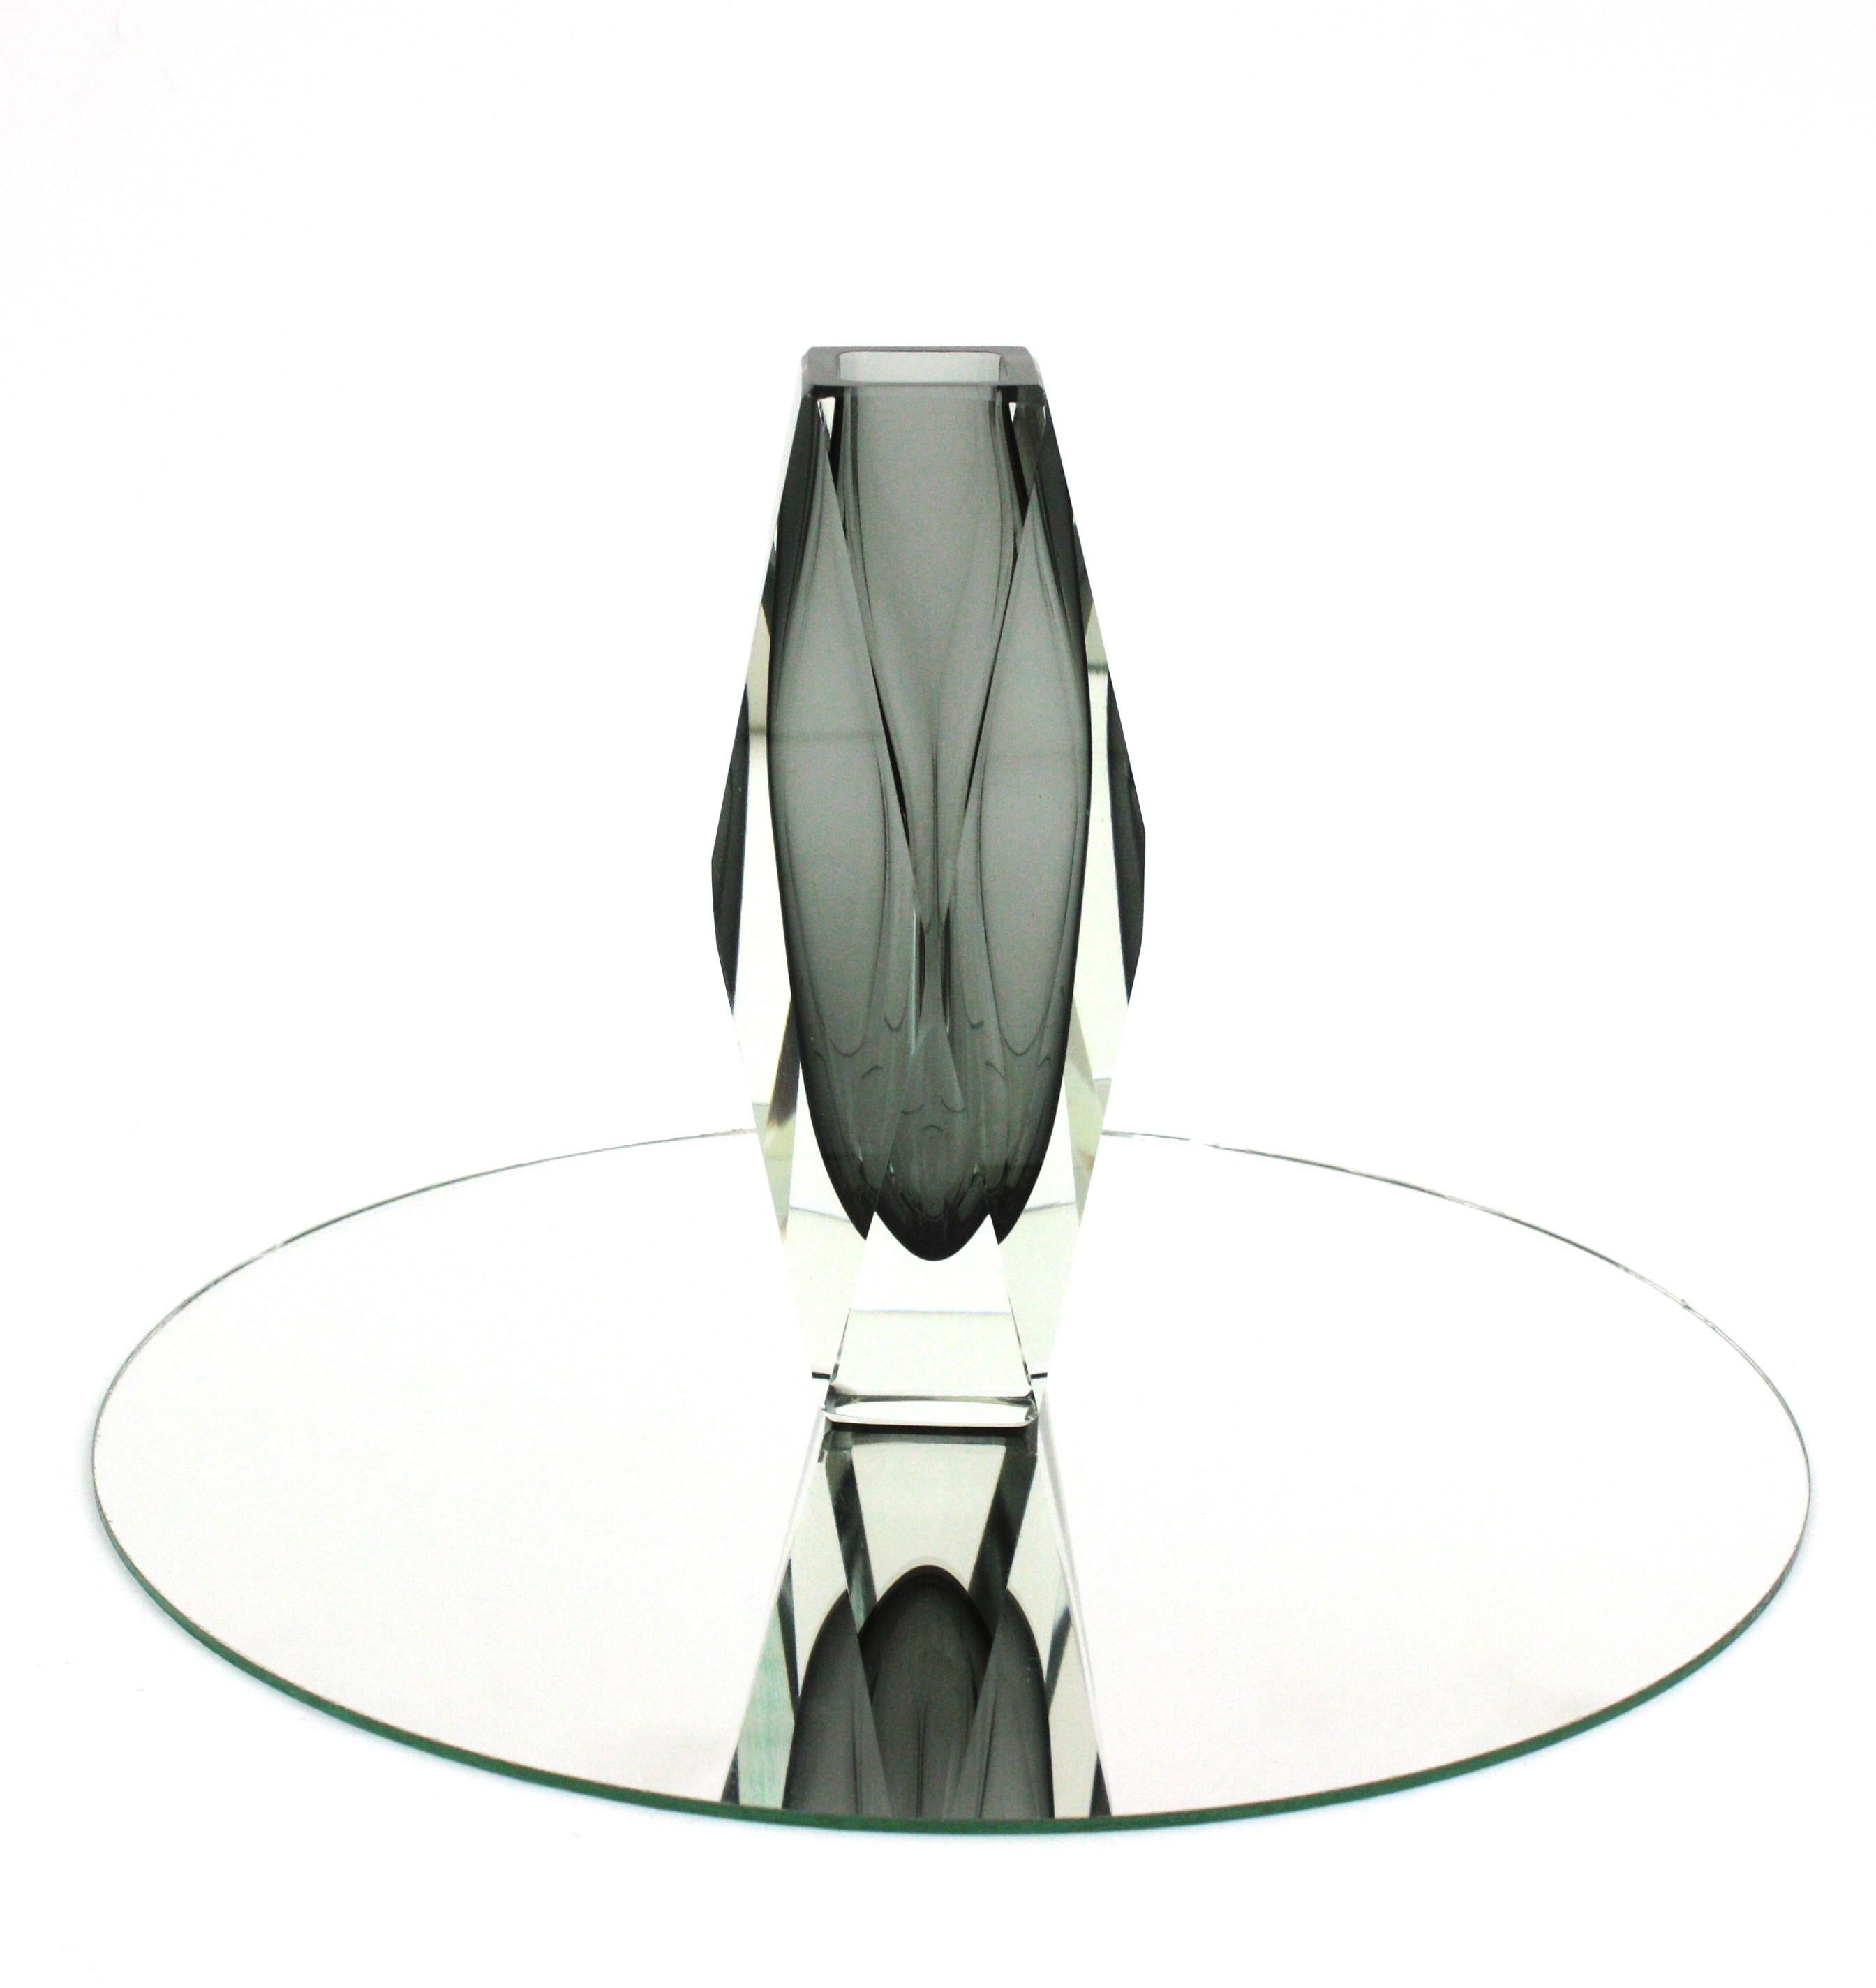 Excellent Sommerso vase with faceted glass in shades of grey. Attributed to Mandruzzato, Italy, 1960s.
Dark and clear grey glass cased into clear glass using the Sommerso technique.
Excellent condition. No chips, no cracks to notice.
Gorgeous placed